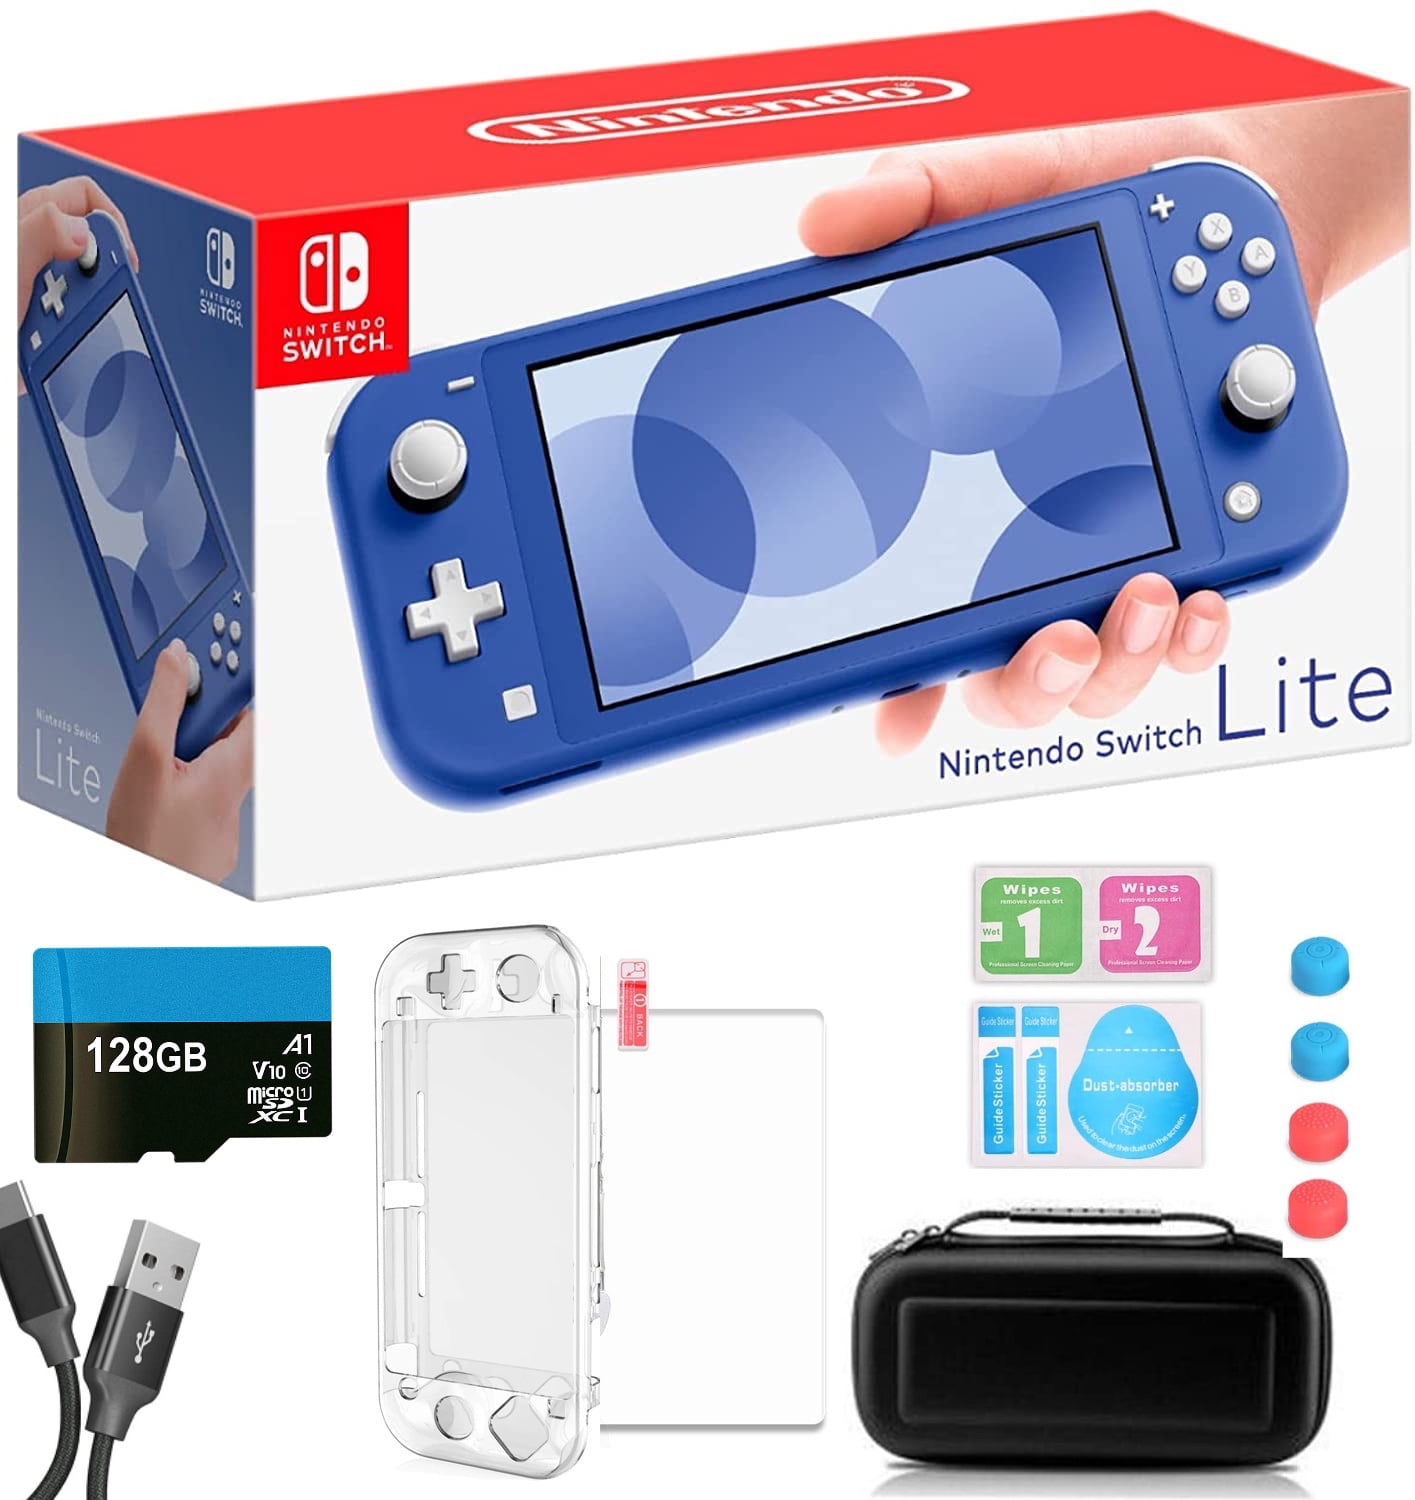 Nintendo Switch Lite 32GB internal storage 5.5 inch LCD touch screen  Bluetooth 4.1Wi-Fi NFC Blue Turquoise Grey Yellow Coral - AliExpress